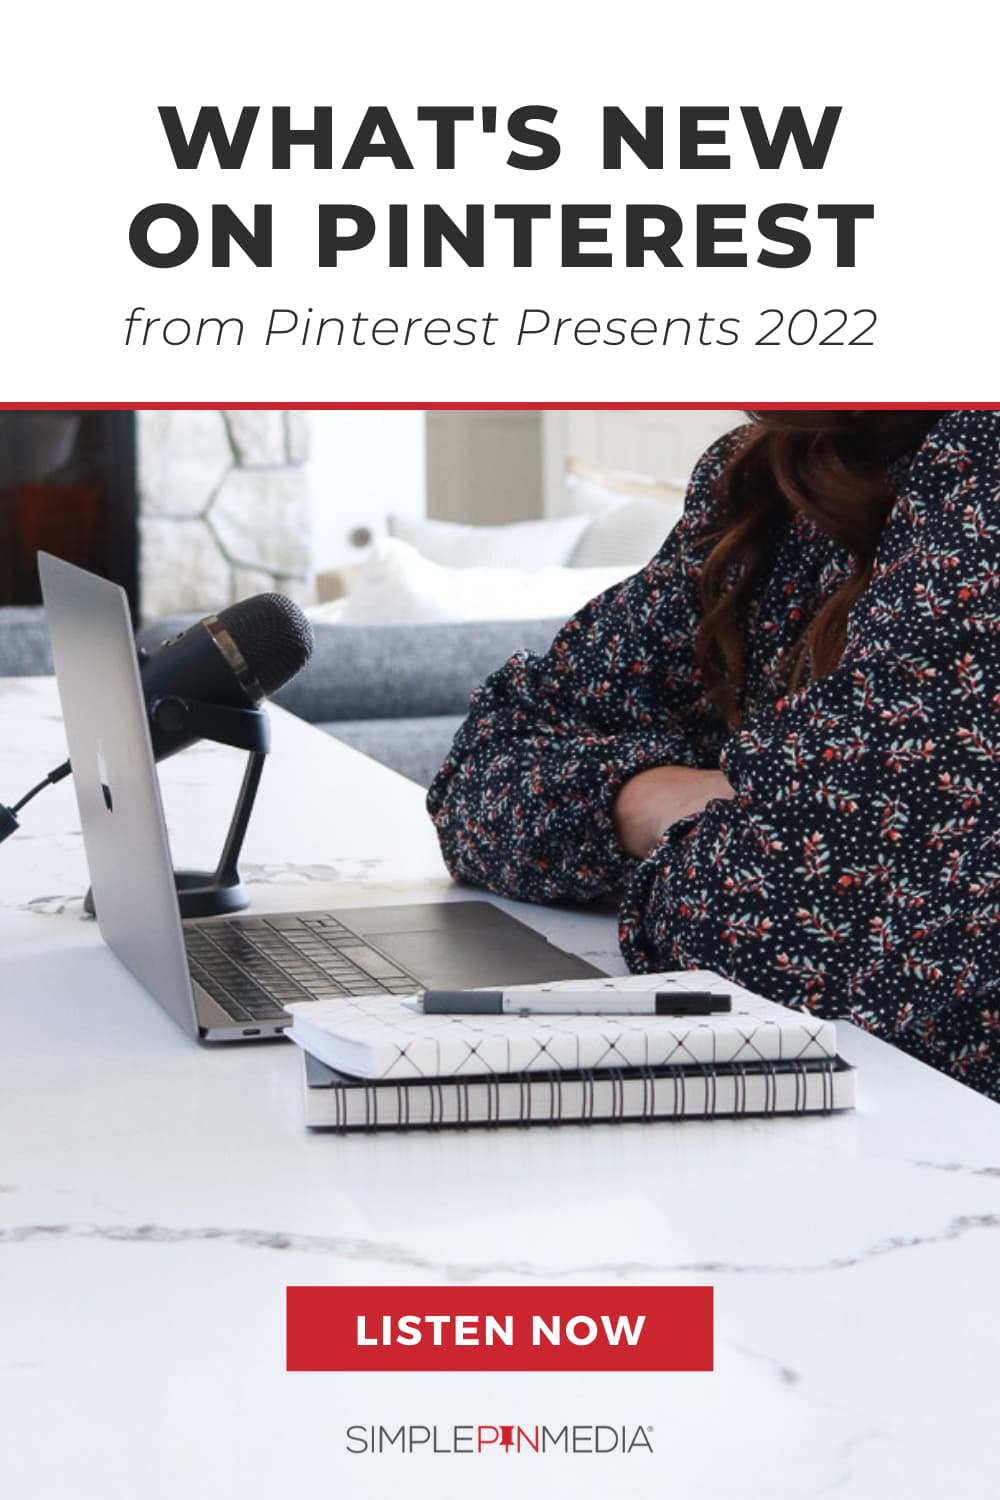 person with arms crossed sitting at laptop - text "what's new on pinterest from pinterest presents 2022".